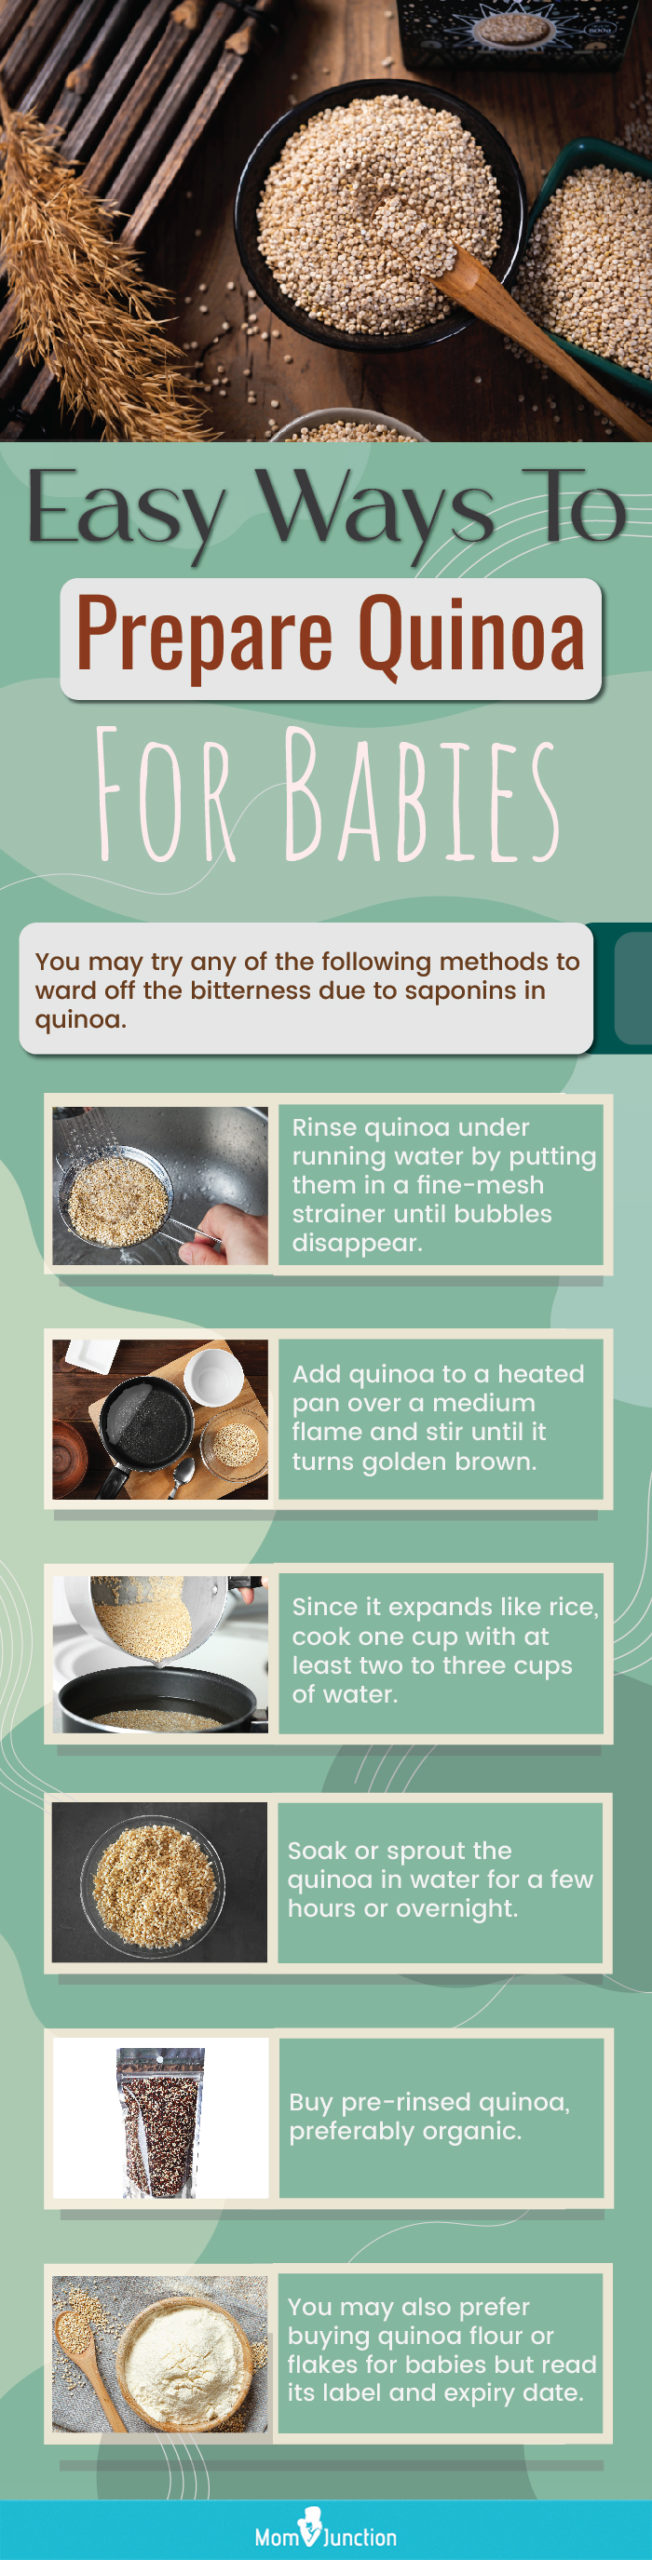 helpful ways to prepare quinoa for babies (infographic)